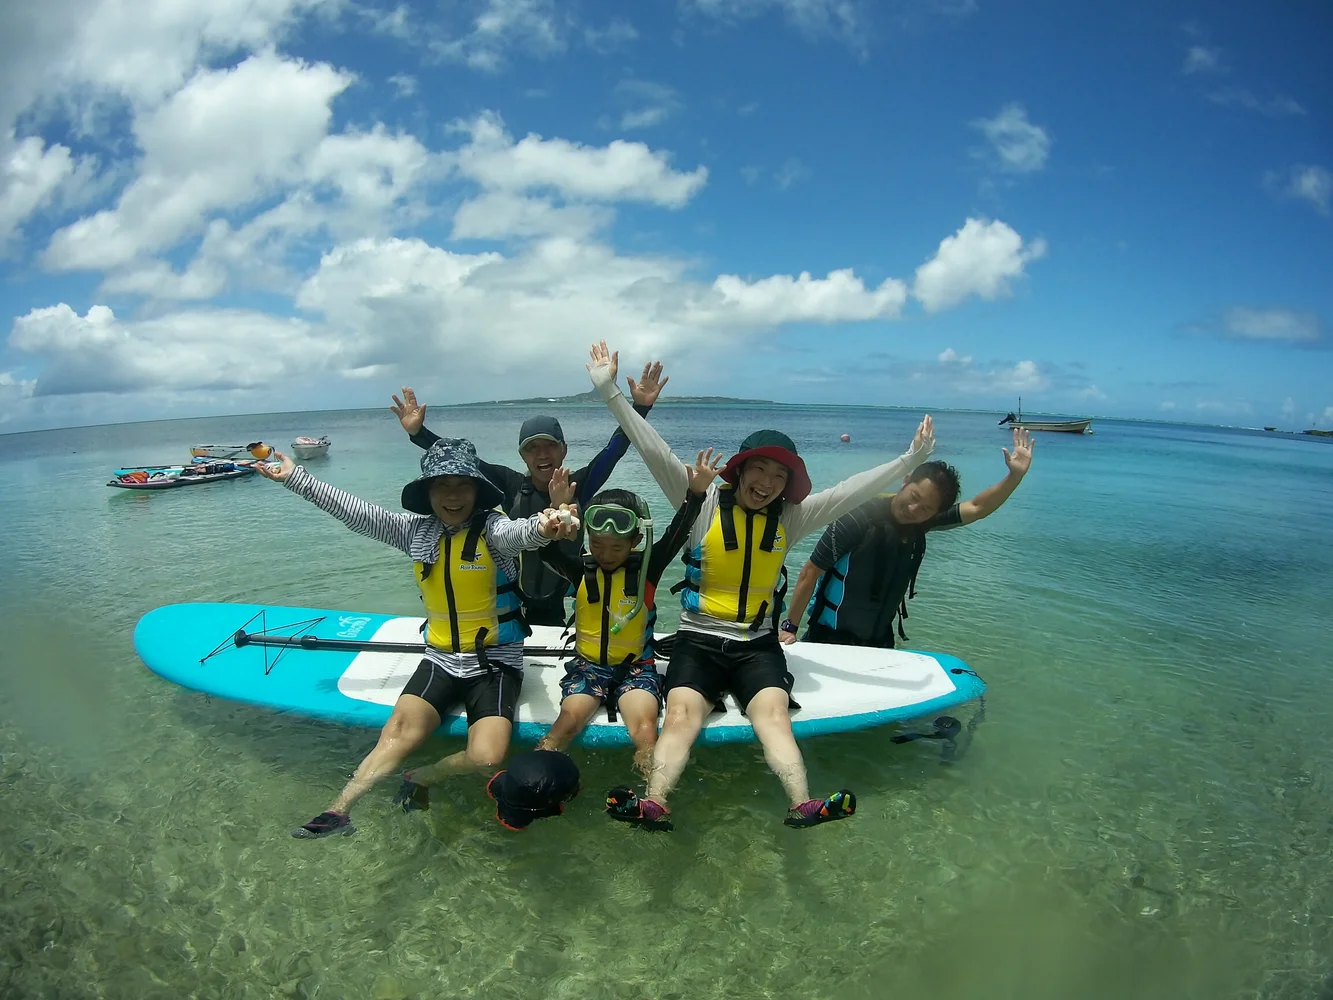 Visit the Bise-no-Warumi Power Spot in Okinawa by SUP